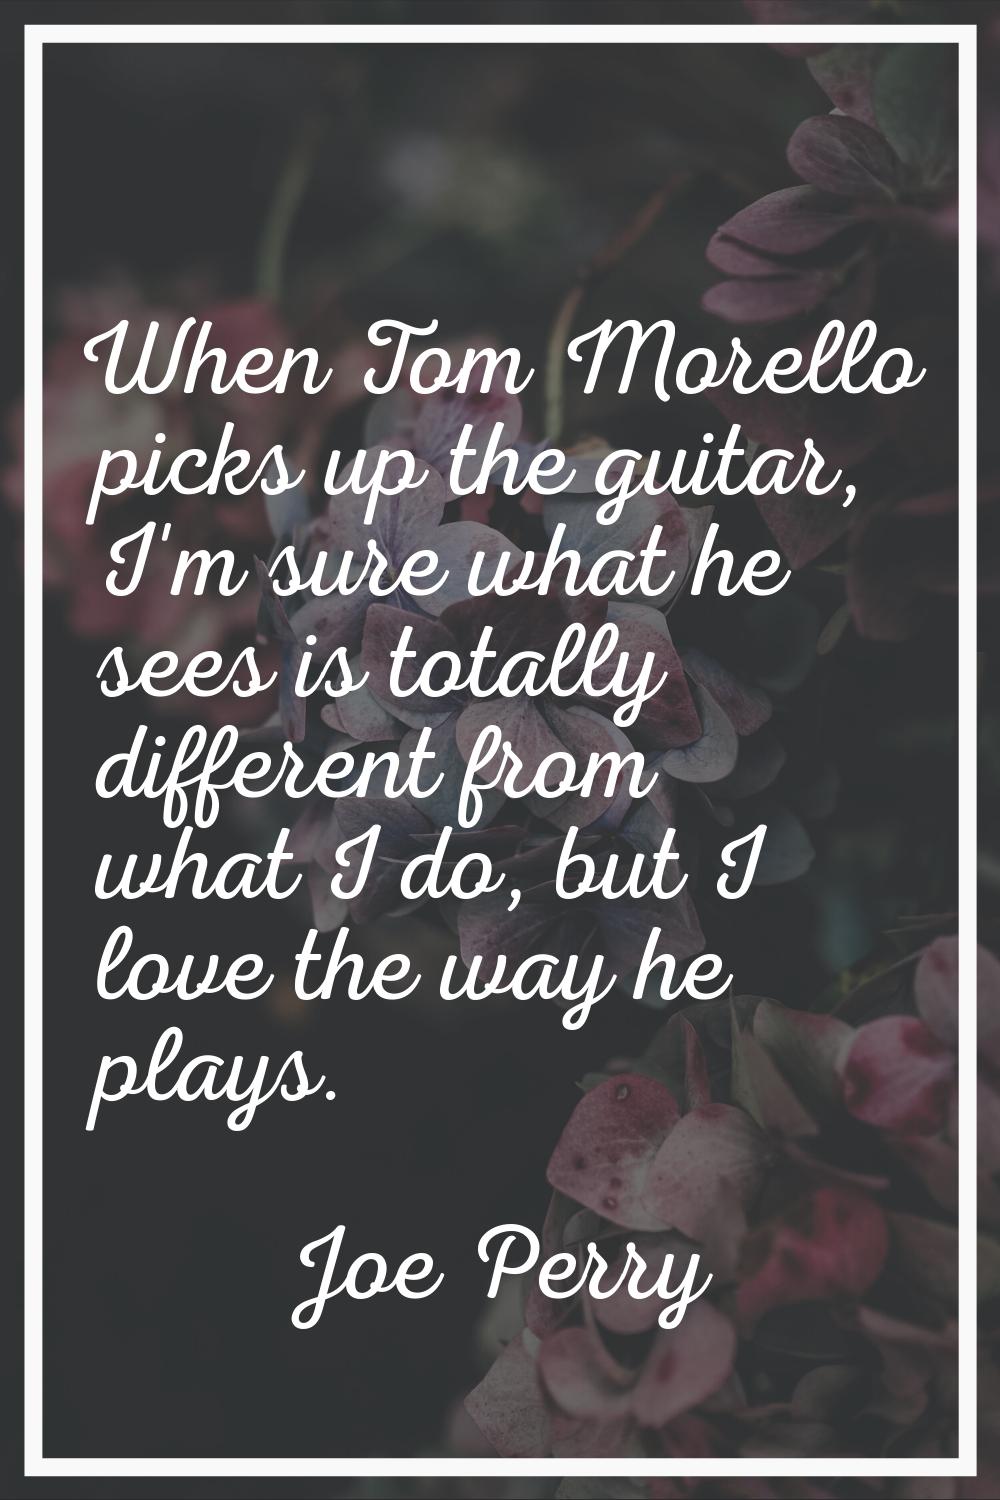 When Tom Morello picks up the guitar, I'm sure what he sees is totally different from what I do, bu